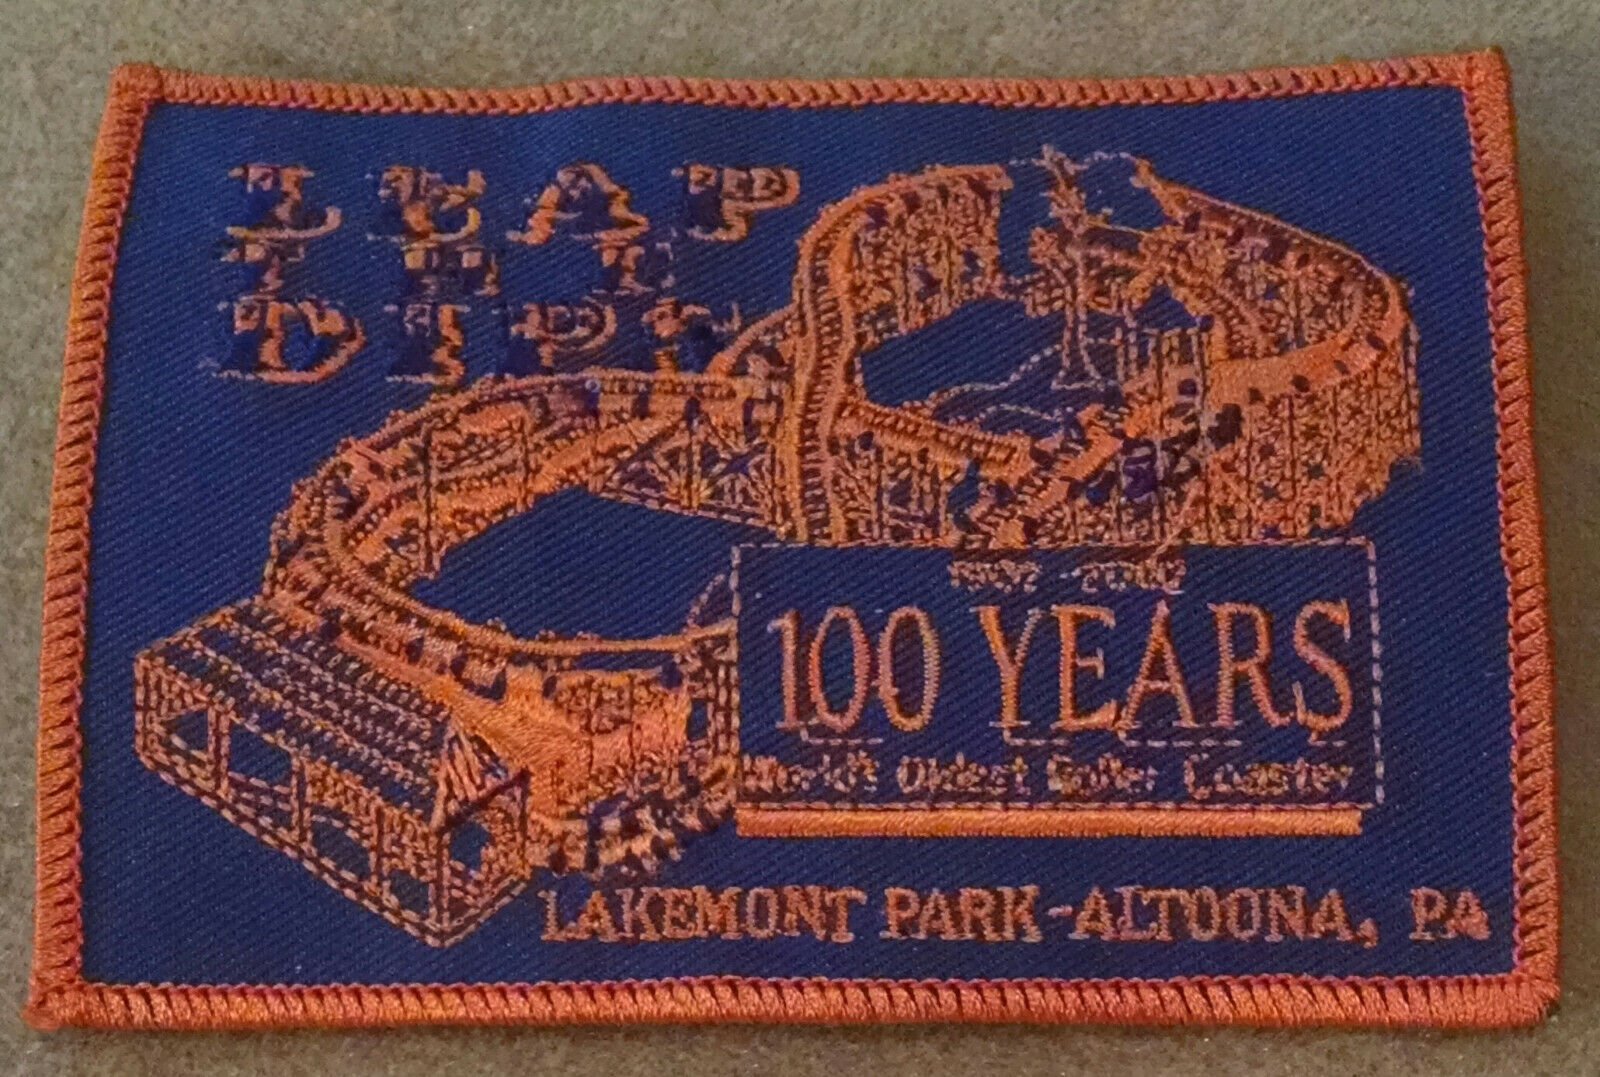 Leap the Dips, Lakemont Park Altoona PA, Embroidered Jacket Patch NEW and Unused